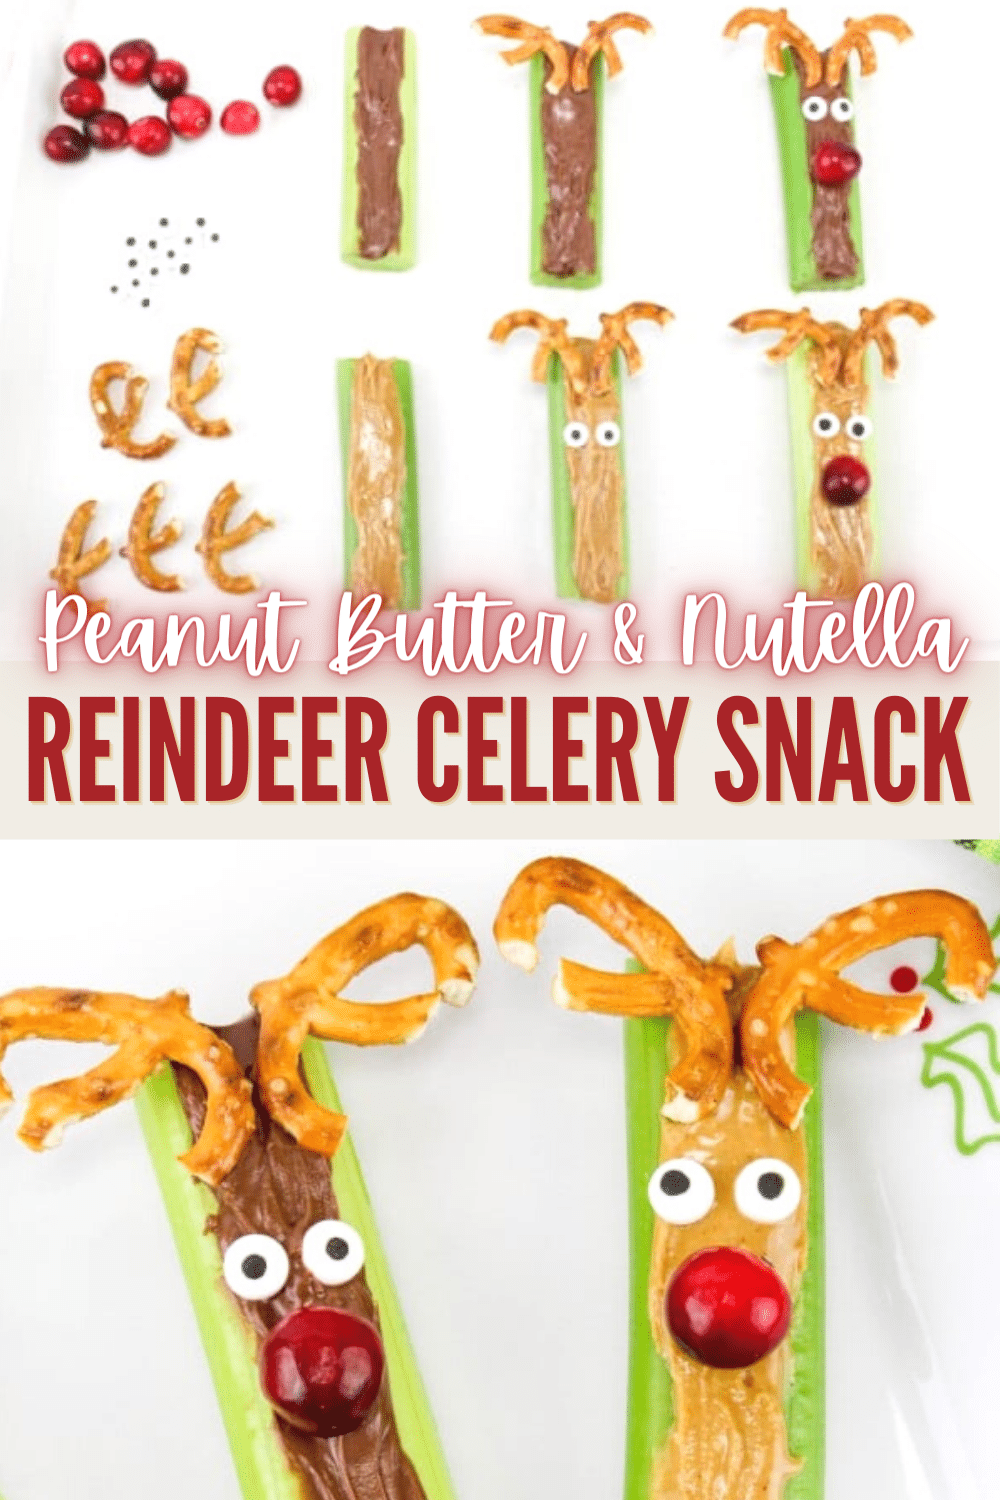 These Celery Reindeer Snacks are so cute and really easy to make. They're the perfect snack for kids during the holiday season. #Christmas #reindeer #funfood #snacks via @wondermomwannab